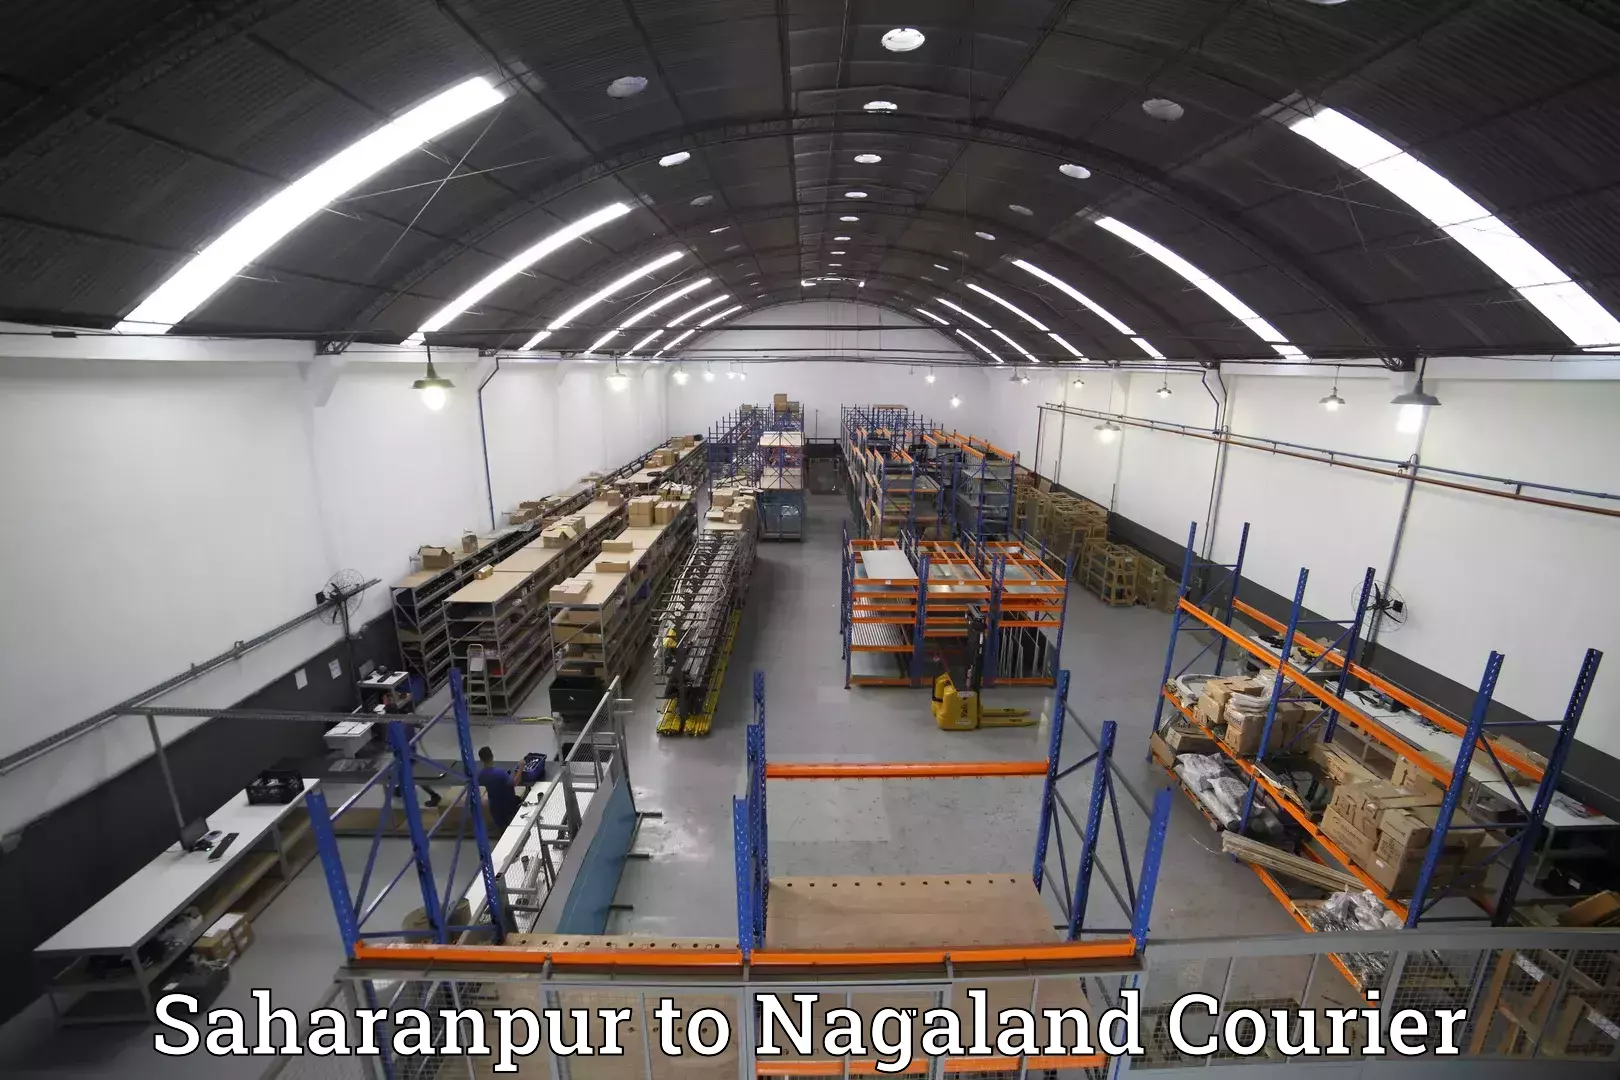 Luggage delivery network Saharanpur to Nagaland